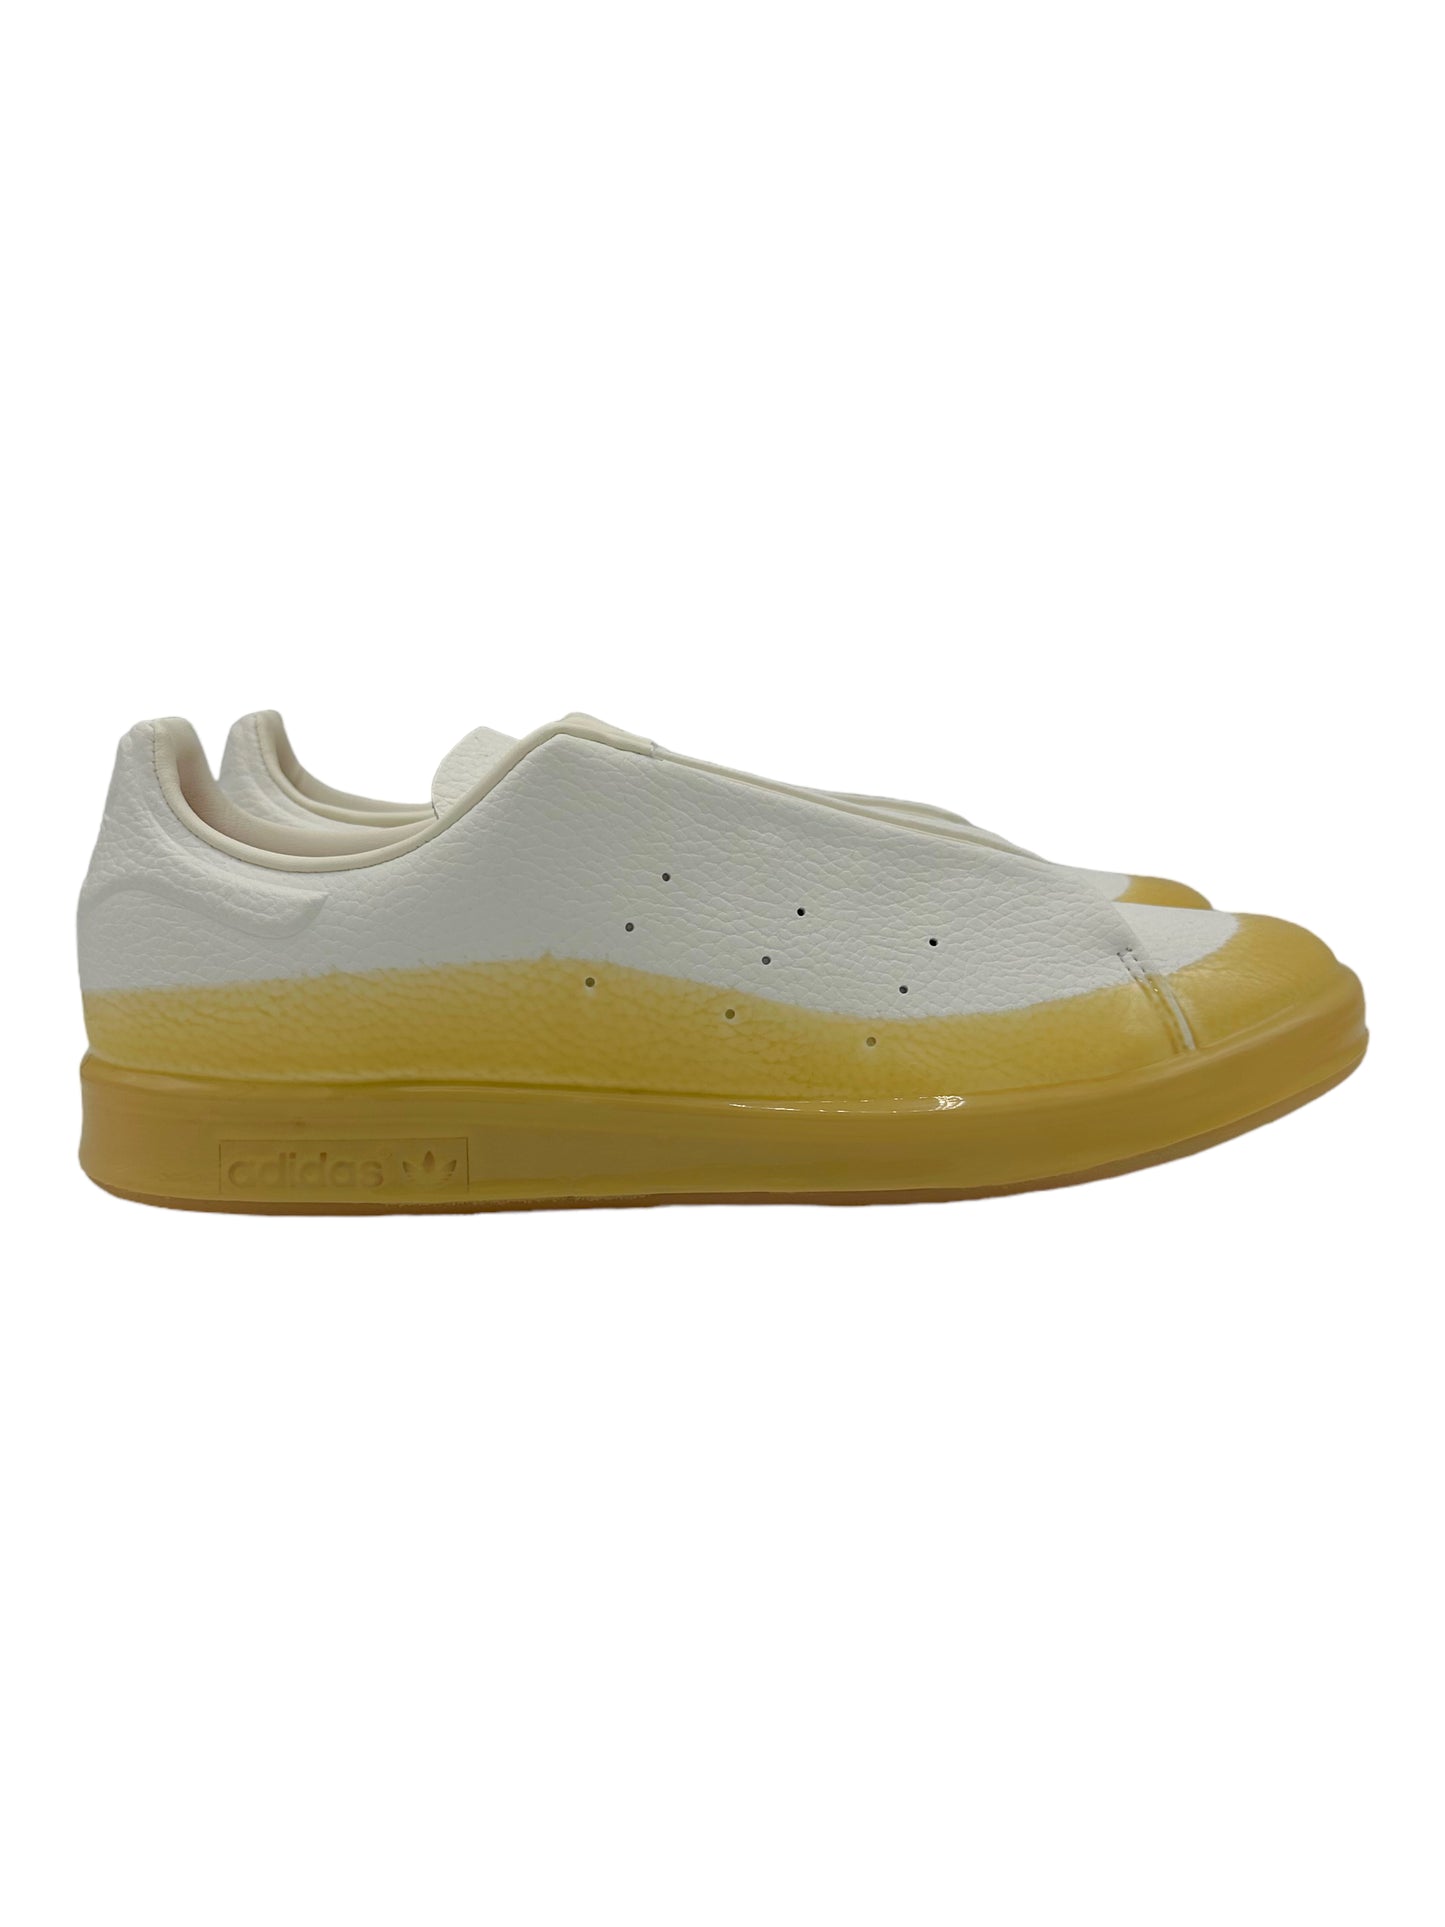 Adidas Stan Smith Dipped Beyonce Ivy Park White Sneakers - Genuine Design Luxury Consignment for Men. New & Pre-Owned Clothing, Shoes, & Accessories. Calgary, Canada